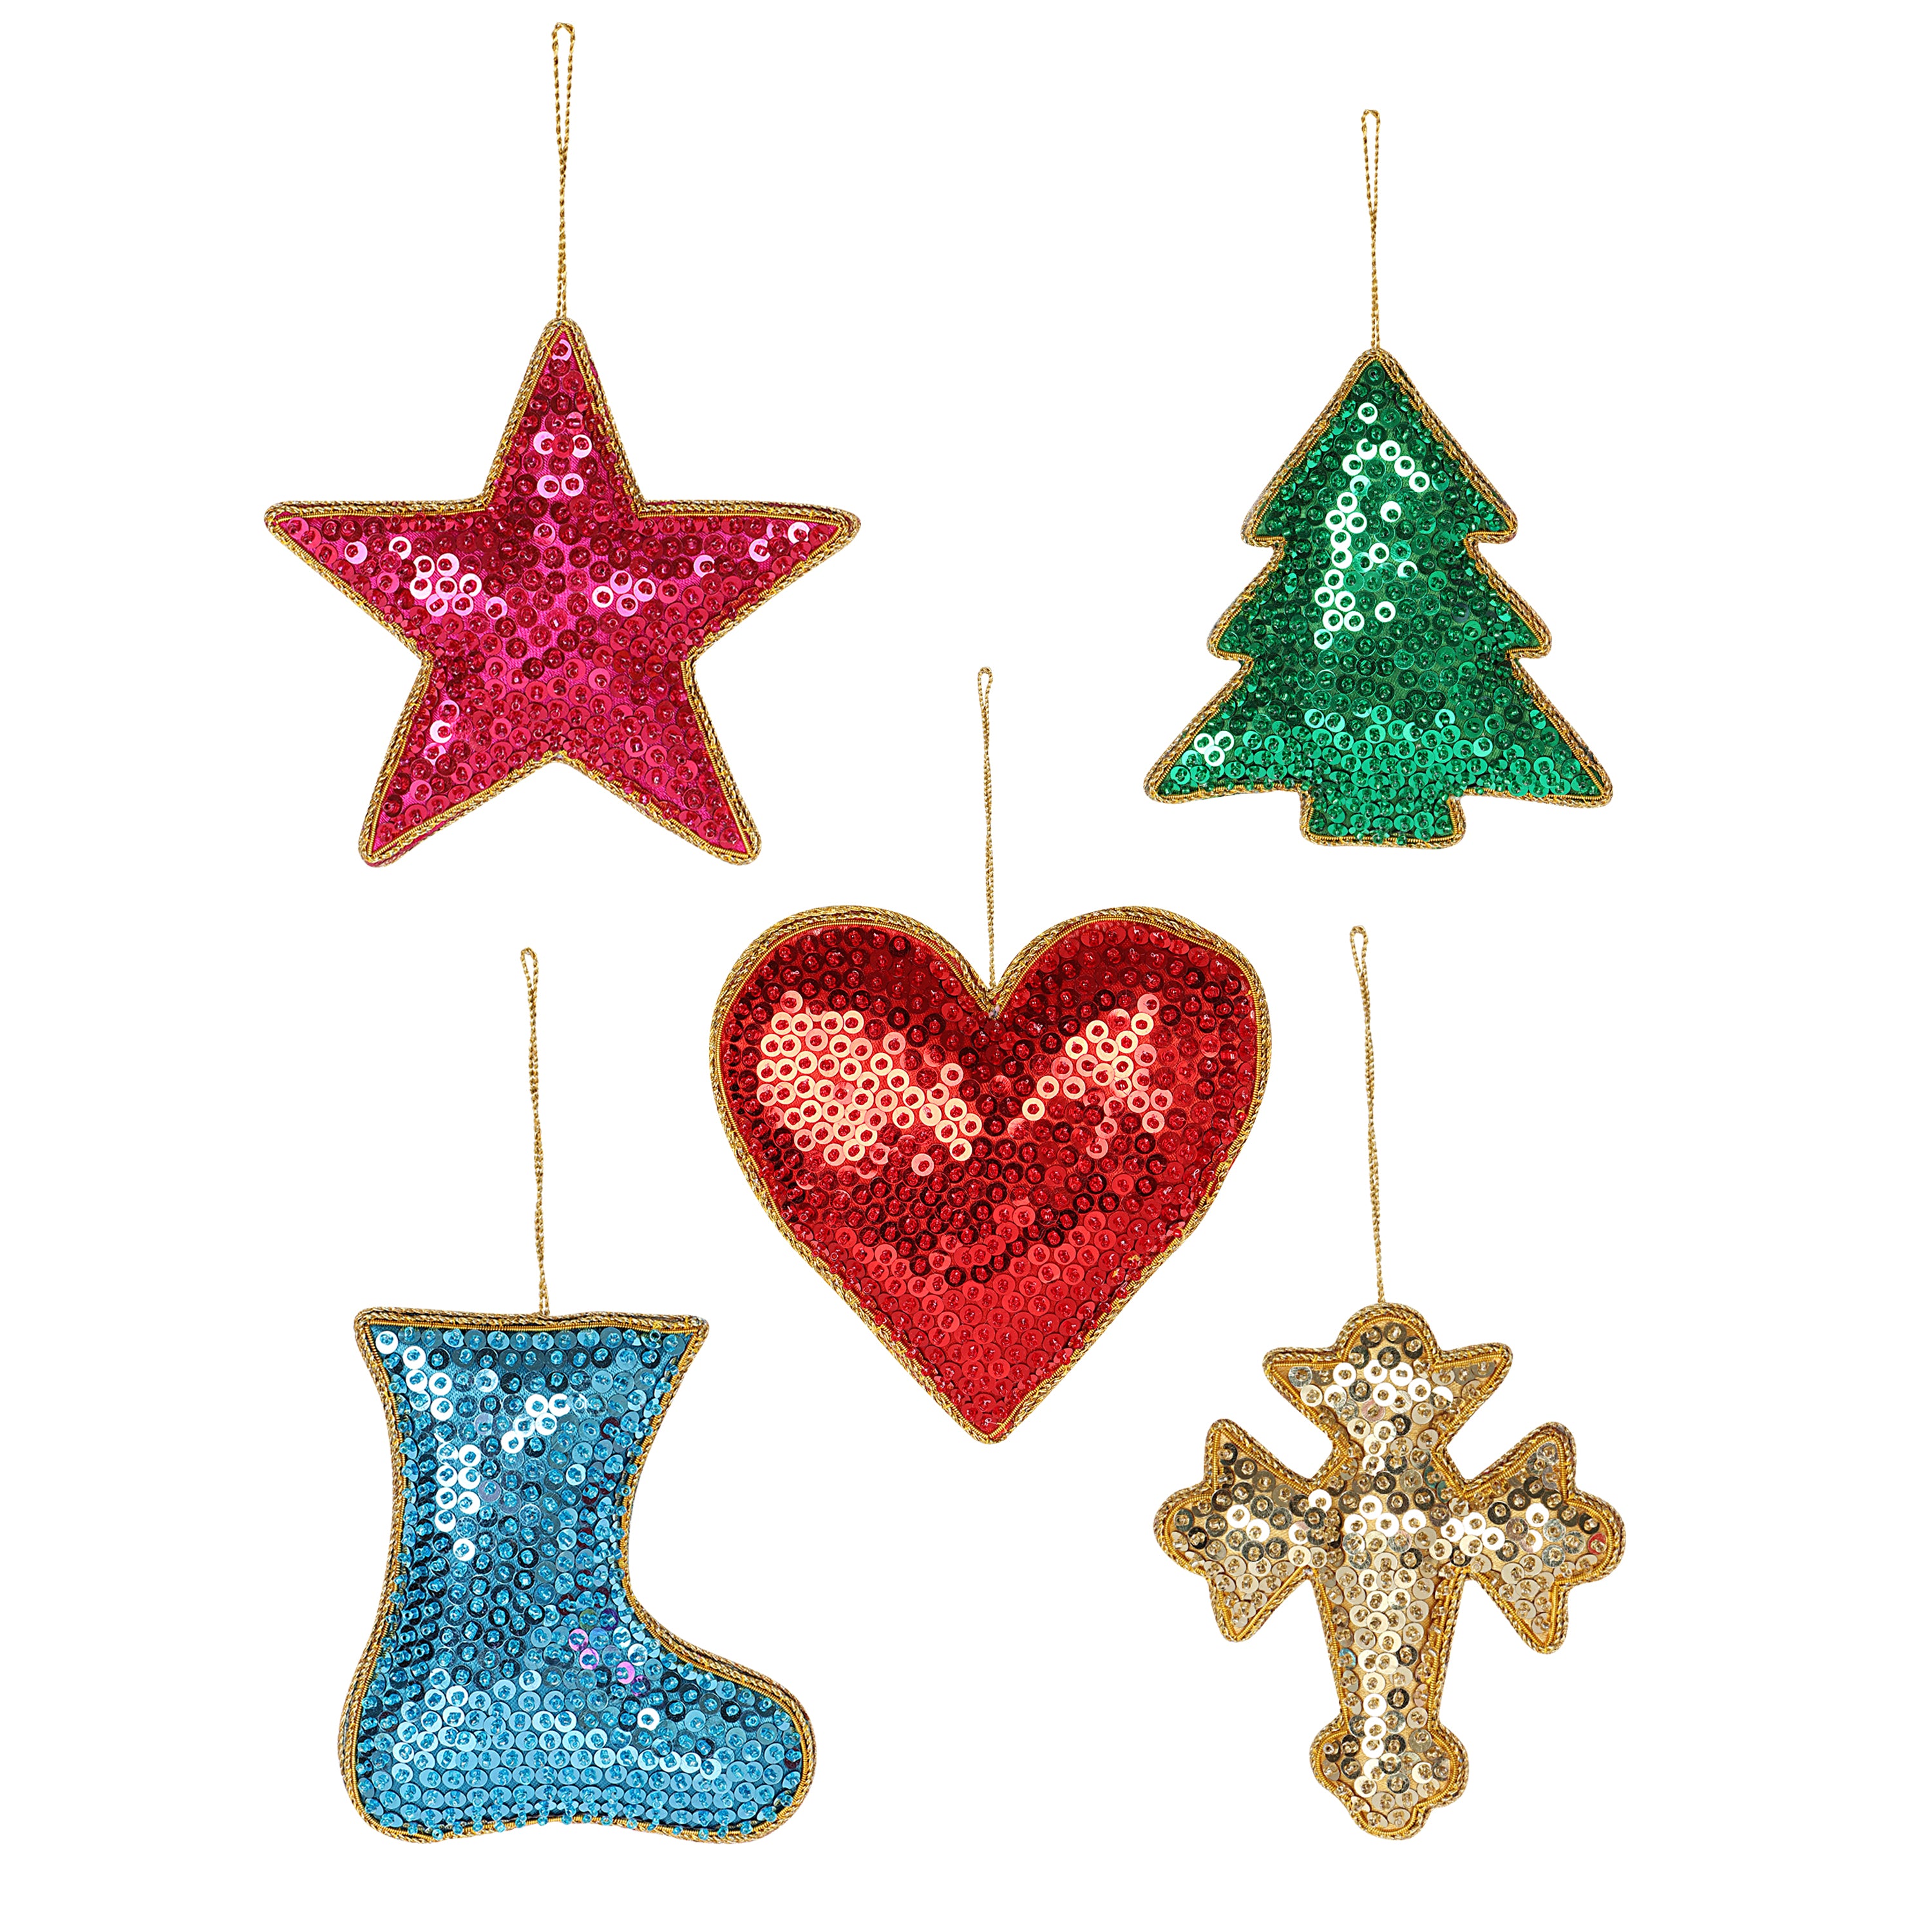 Sparkling Charm - Stars, Hearts, Cross, Shoe & tree Christmas ornaments set of 5 pieces for holiday decor (1SET=5PC)